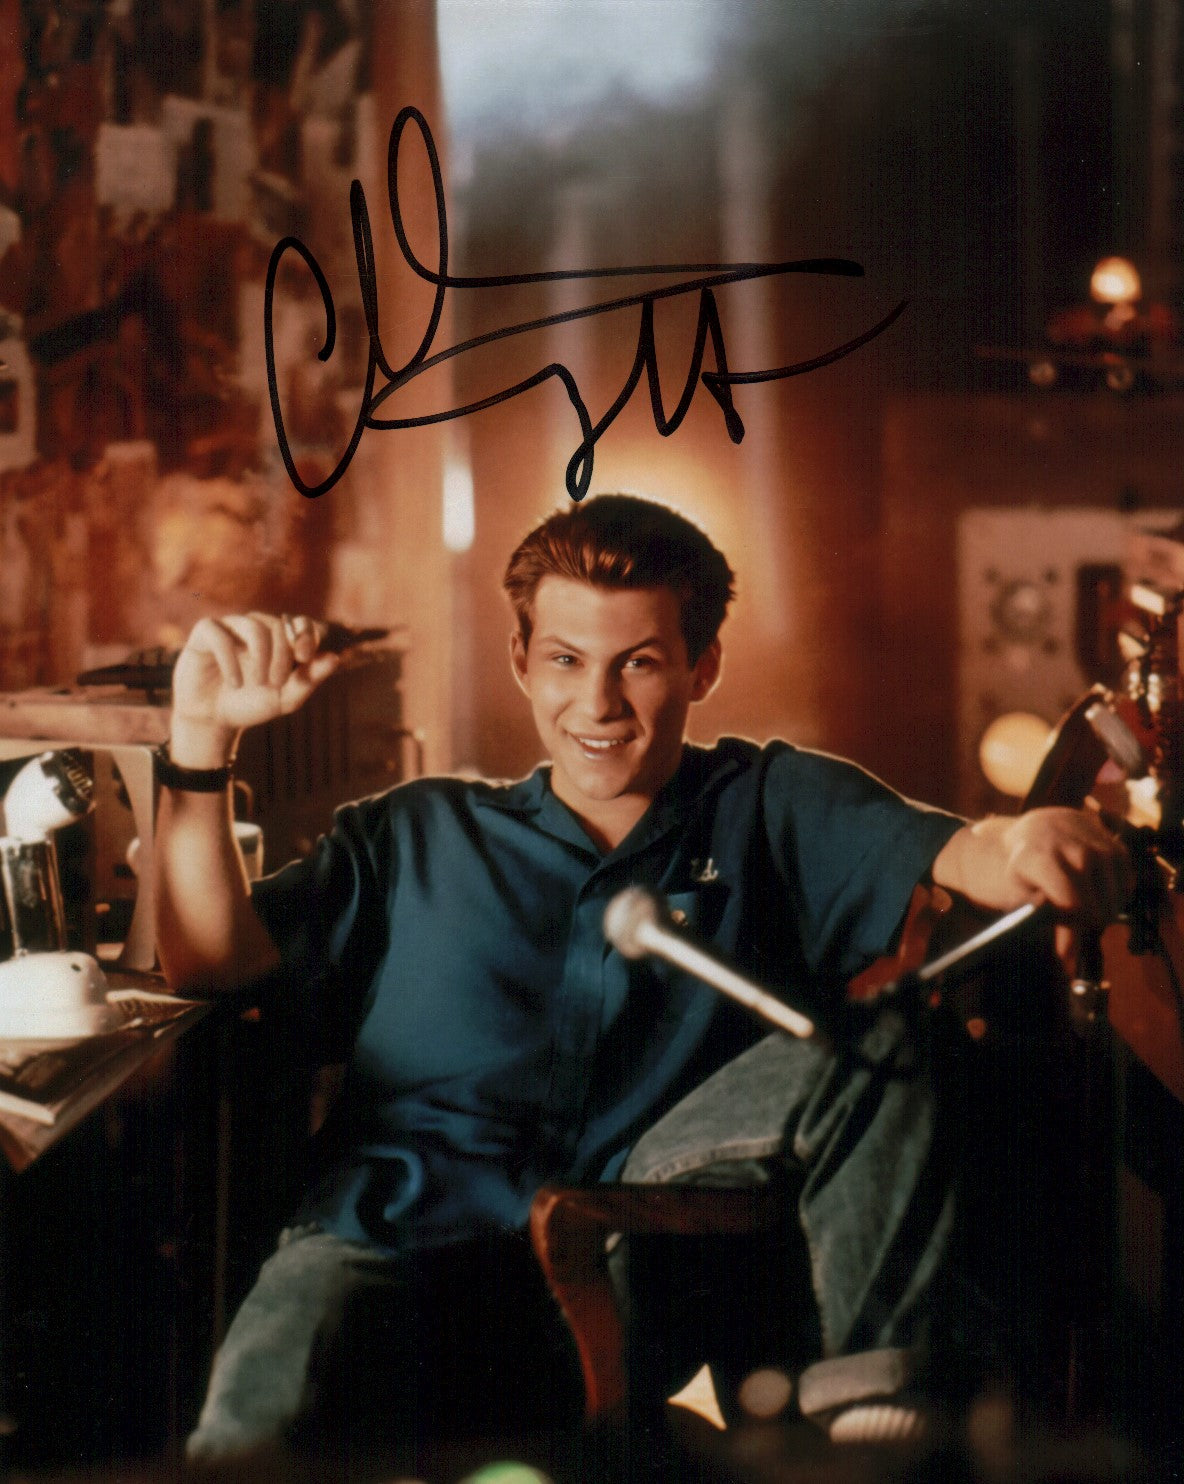 Christian Slater Pump Up The Volume 8x10 Photo Signed Autographed JSA Certified